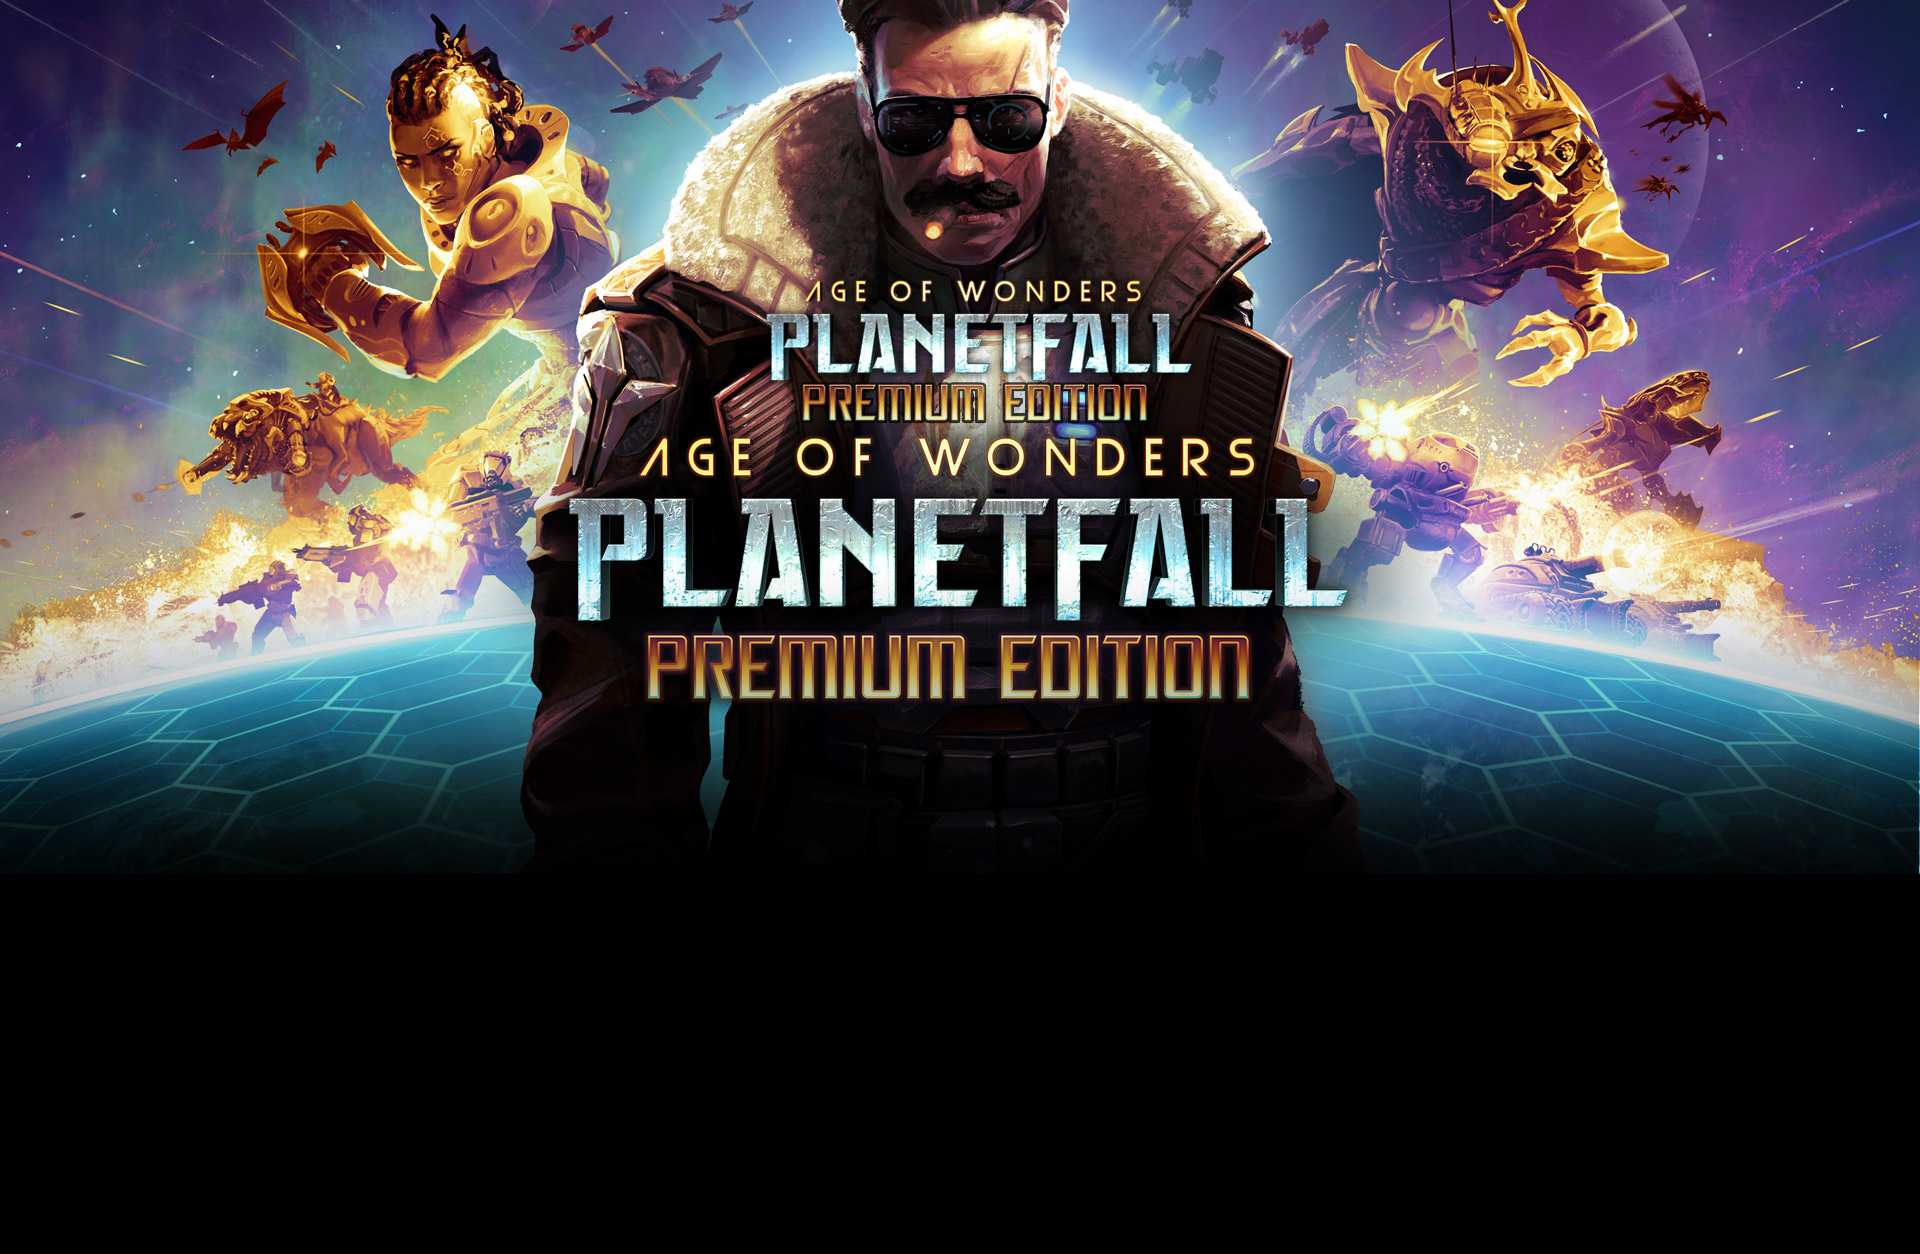 age of wonders planetfall game is saying will download when released but its reeased today?